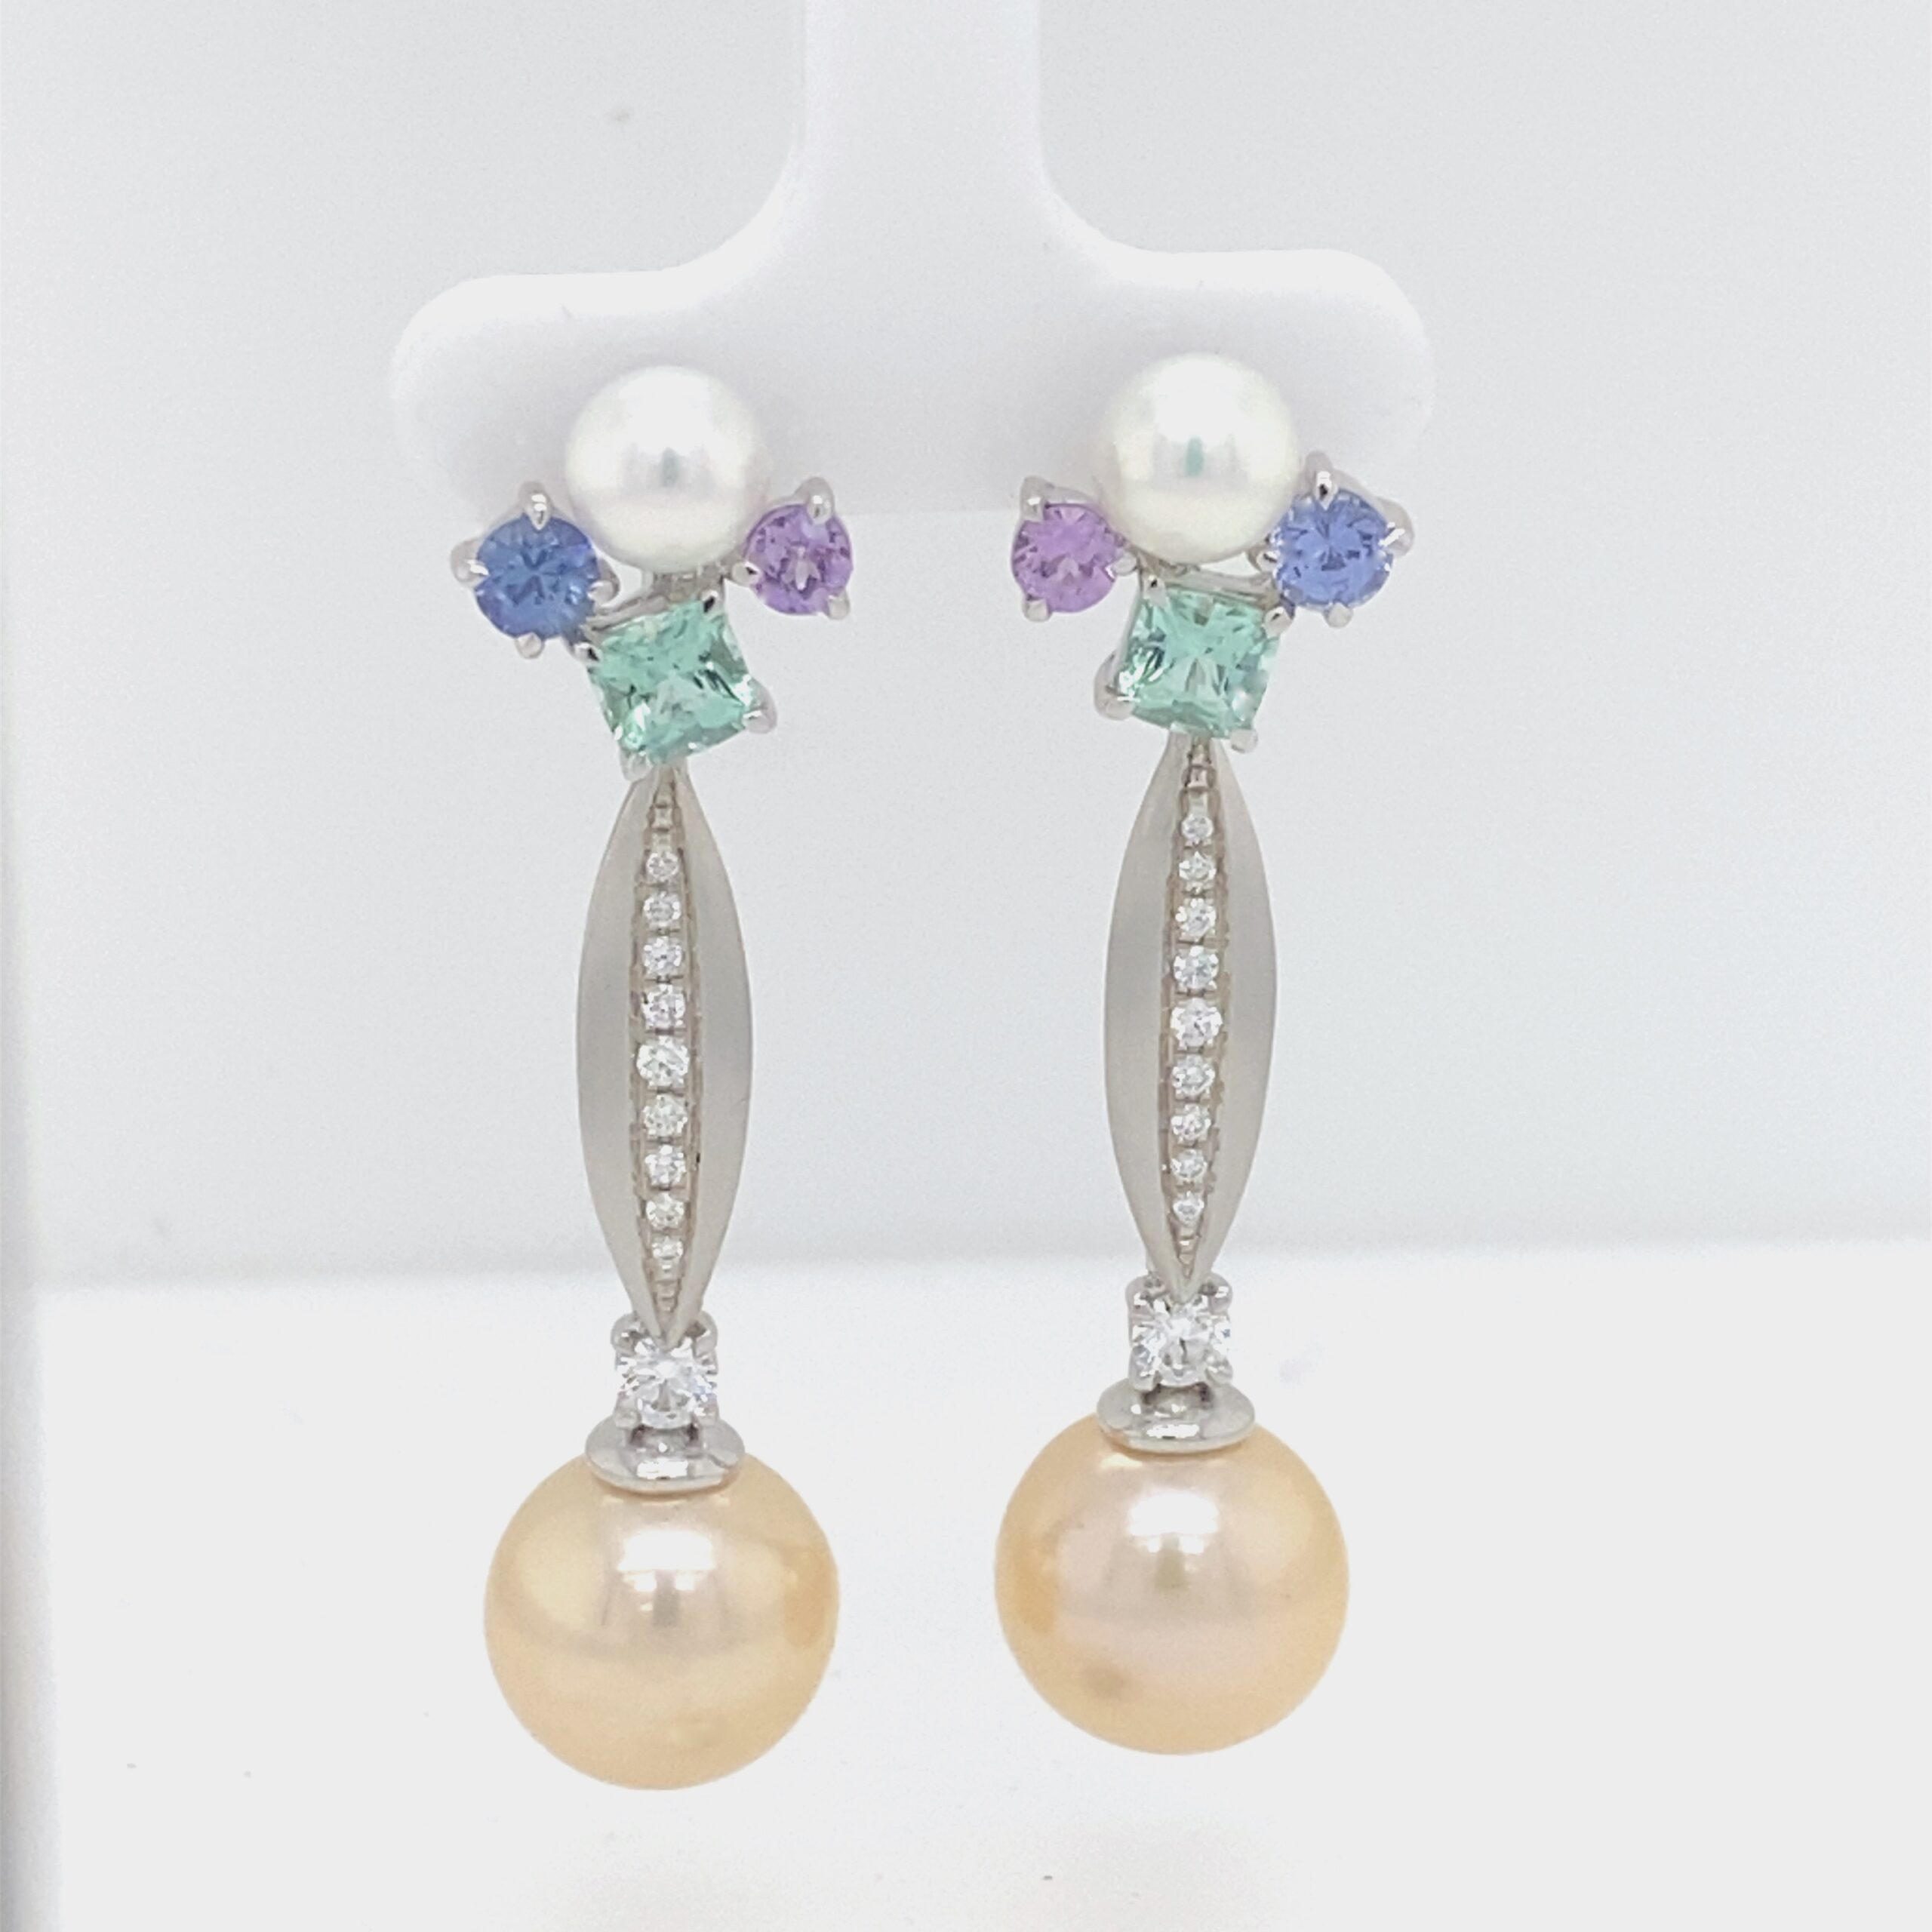 Scintilla earring in Seafood Tourmaline, Pink and Blue Sapphire and Pearl, Pea Pod Bridge and South Sea Pearl